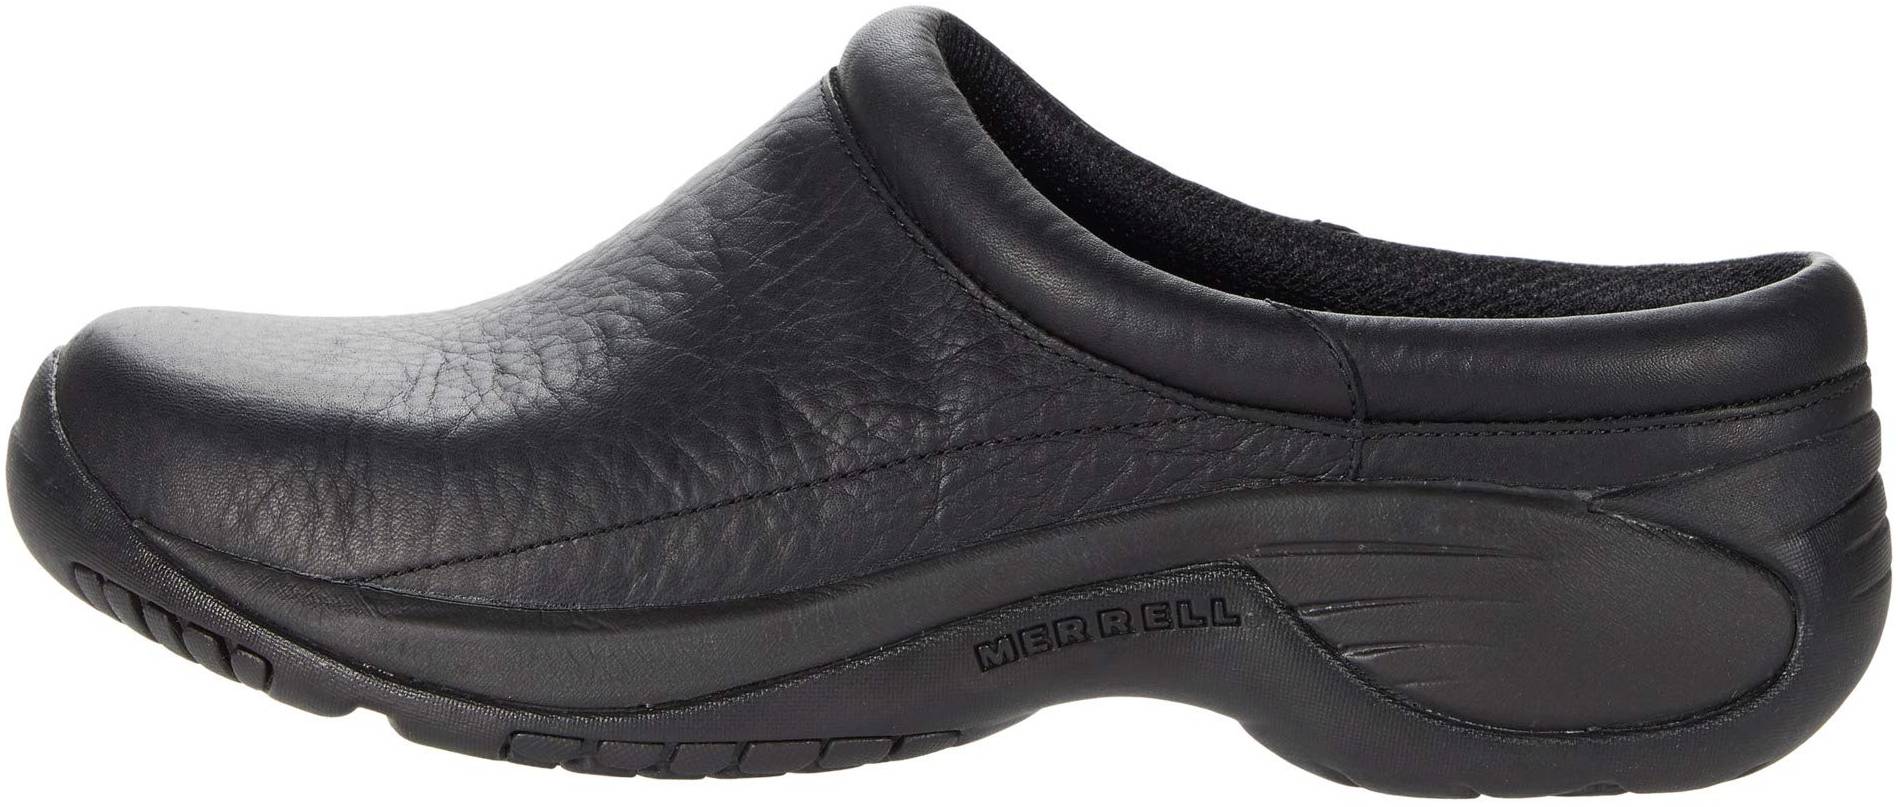 Loafers & Slip-Ons Merrell Mens Encore Gust 2 Moccasin